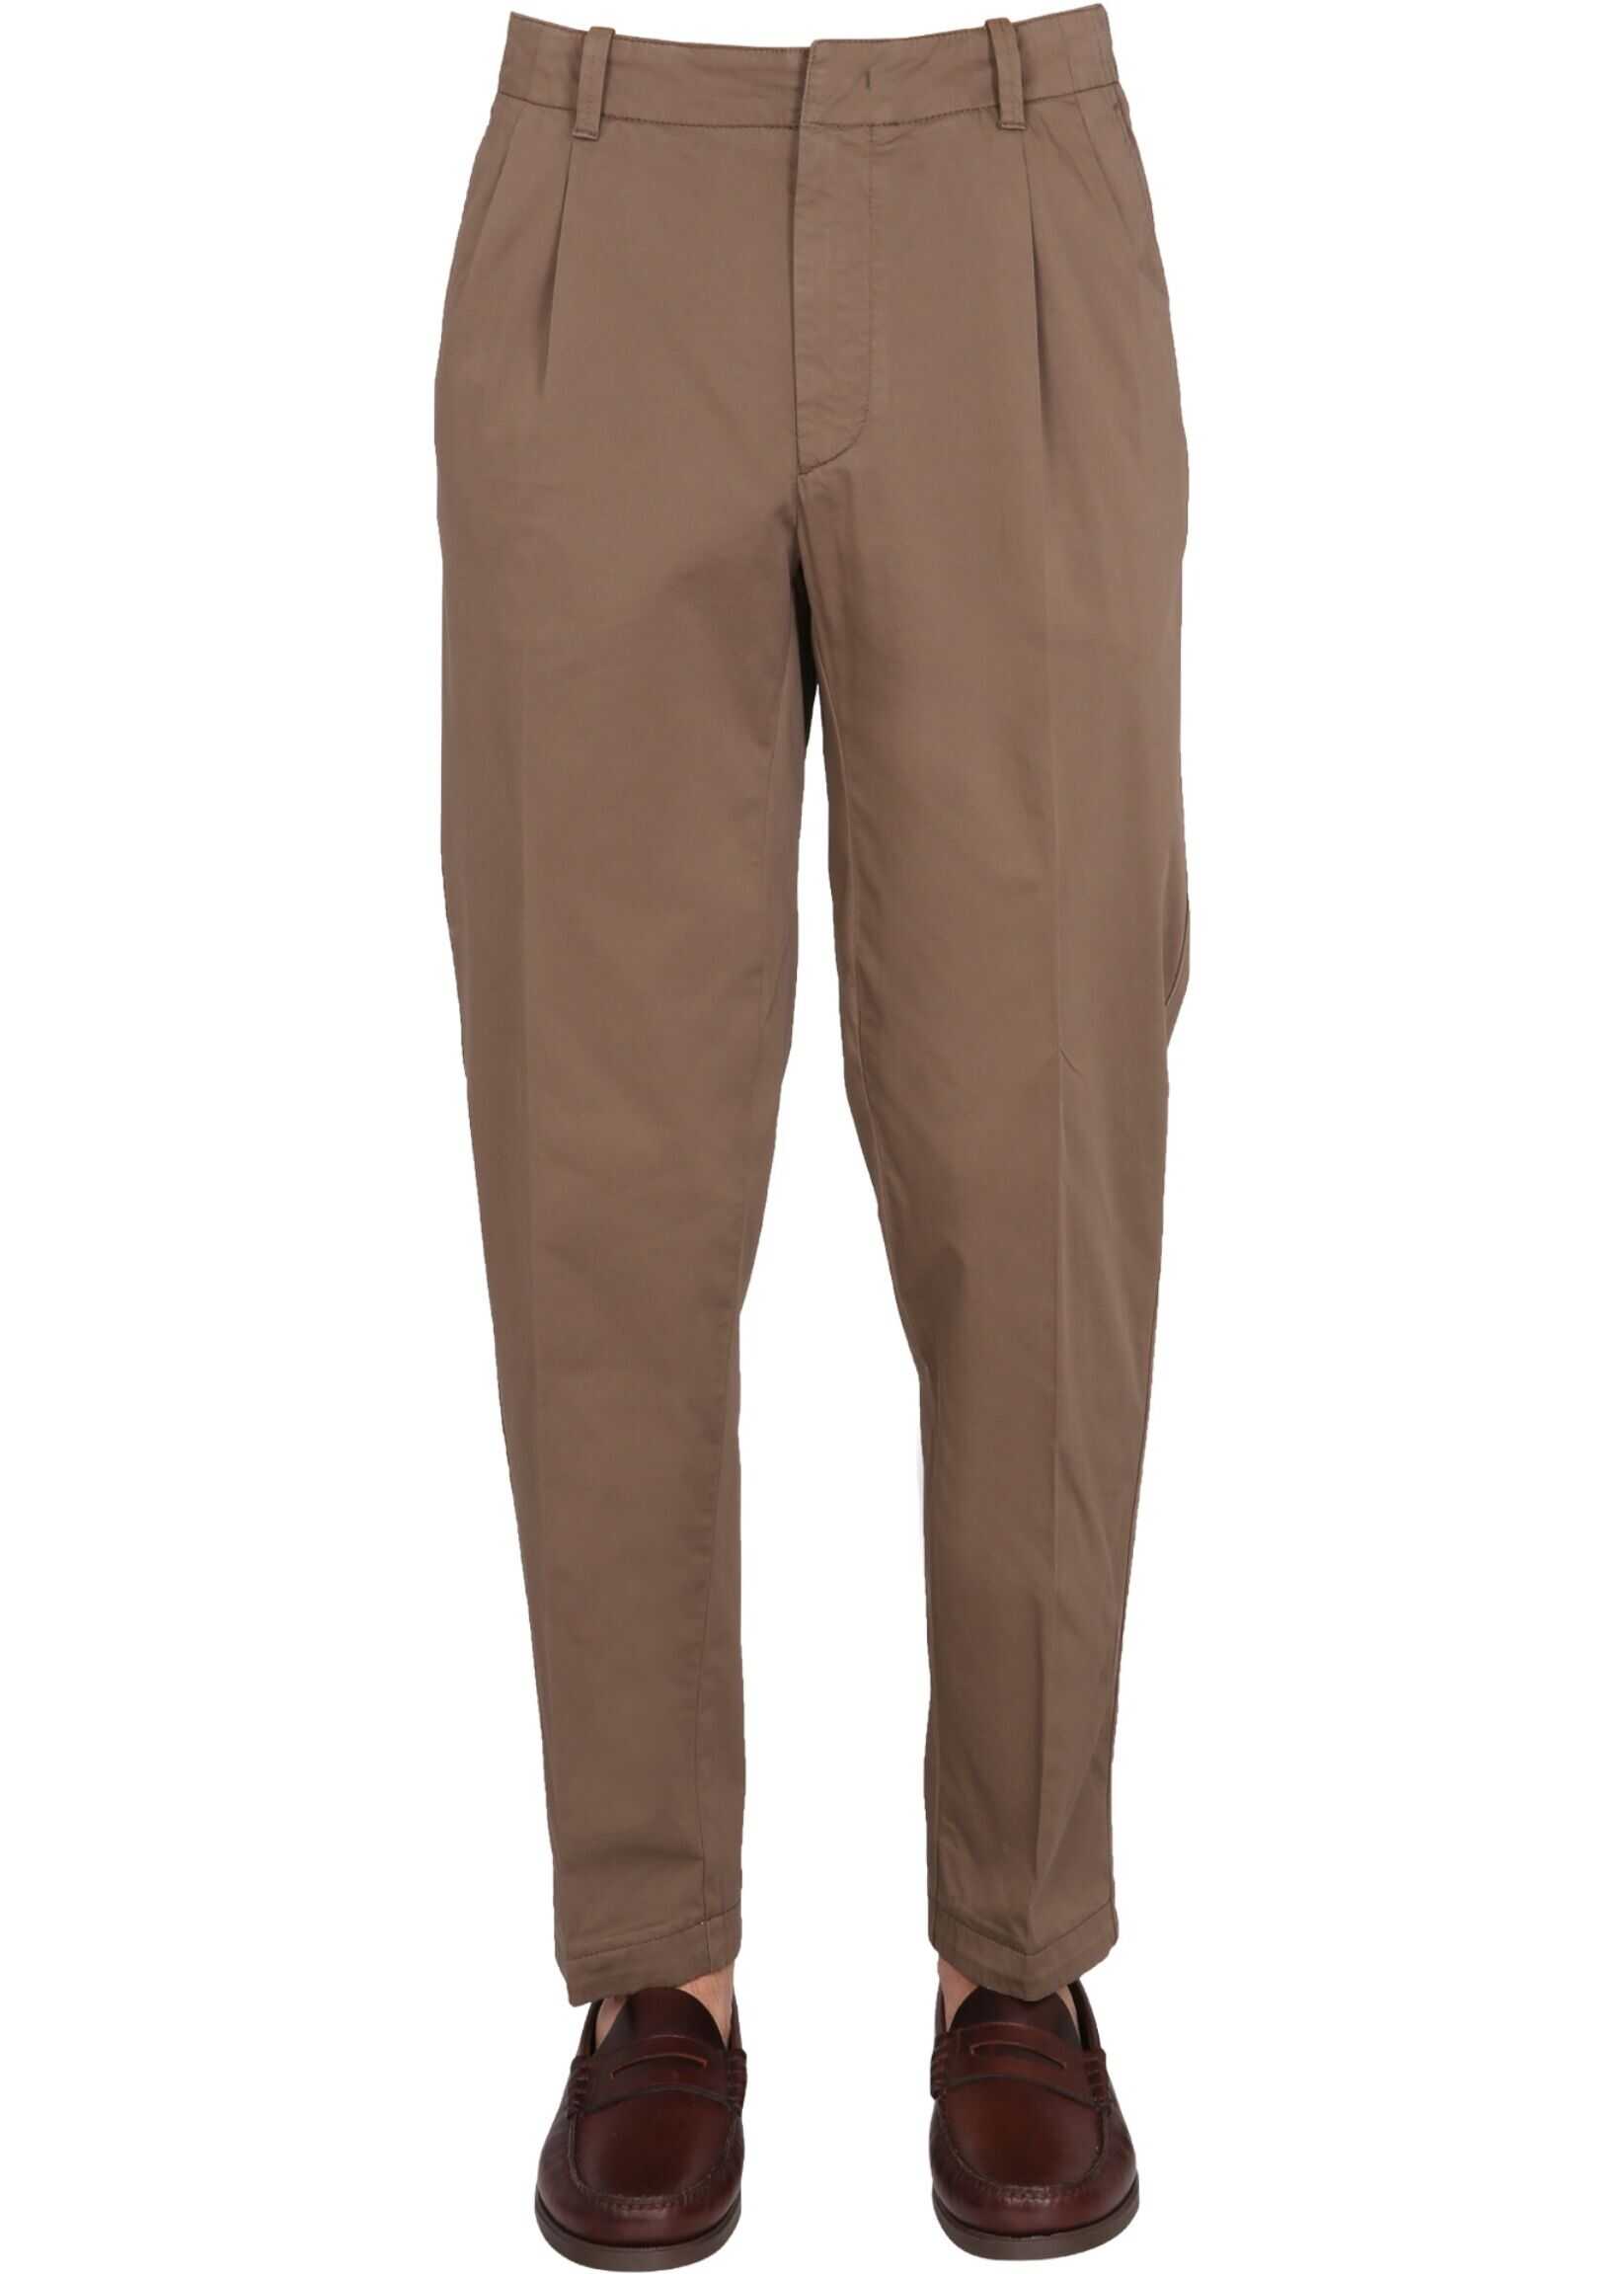 Z Zegna Cotton Trousers VY115ZZ337_N07 BROWN